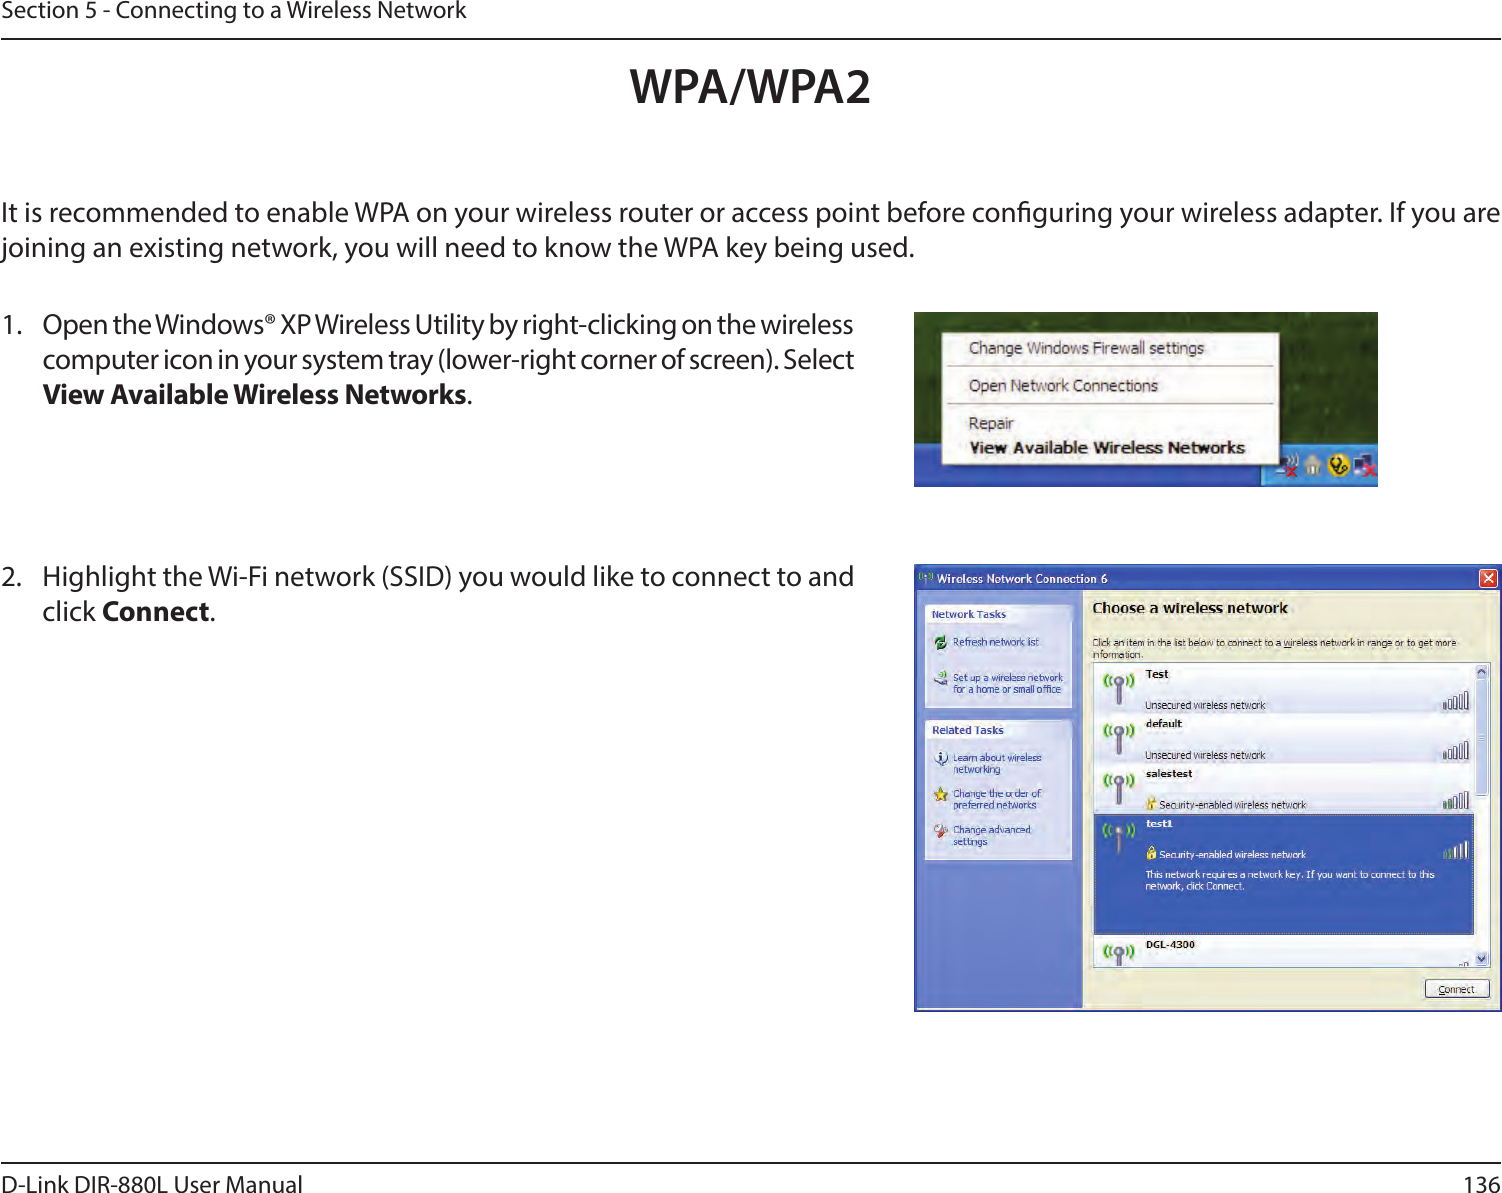 136D-Link DIR-880L User ManualSection 5 - Connecting to a Wireless NetworkIt is recommended to enable WPA on your wireless router or access point before conguring your wireless adapter. If you are joining an existing network, you will need to know the WPA key being used.2.  Highlight the Wi-Fi network (SSID) you would like to connect to and click Connect.1.  Open the Windows® XP Wireless Utility by right-clicking on the wireless computer icon in your system tray (lower-right corner of screen). Select View Available Wireless Networks. WPA/WPA2